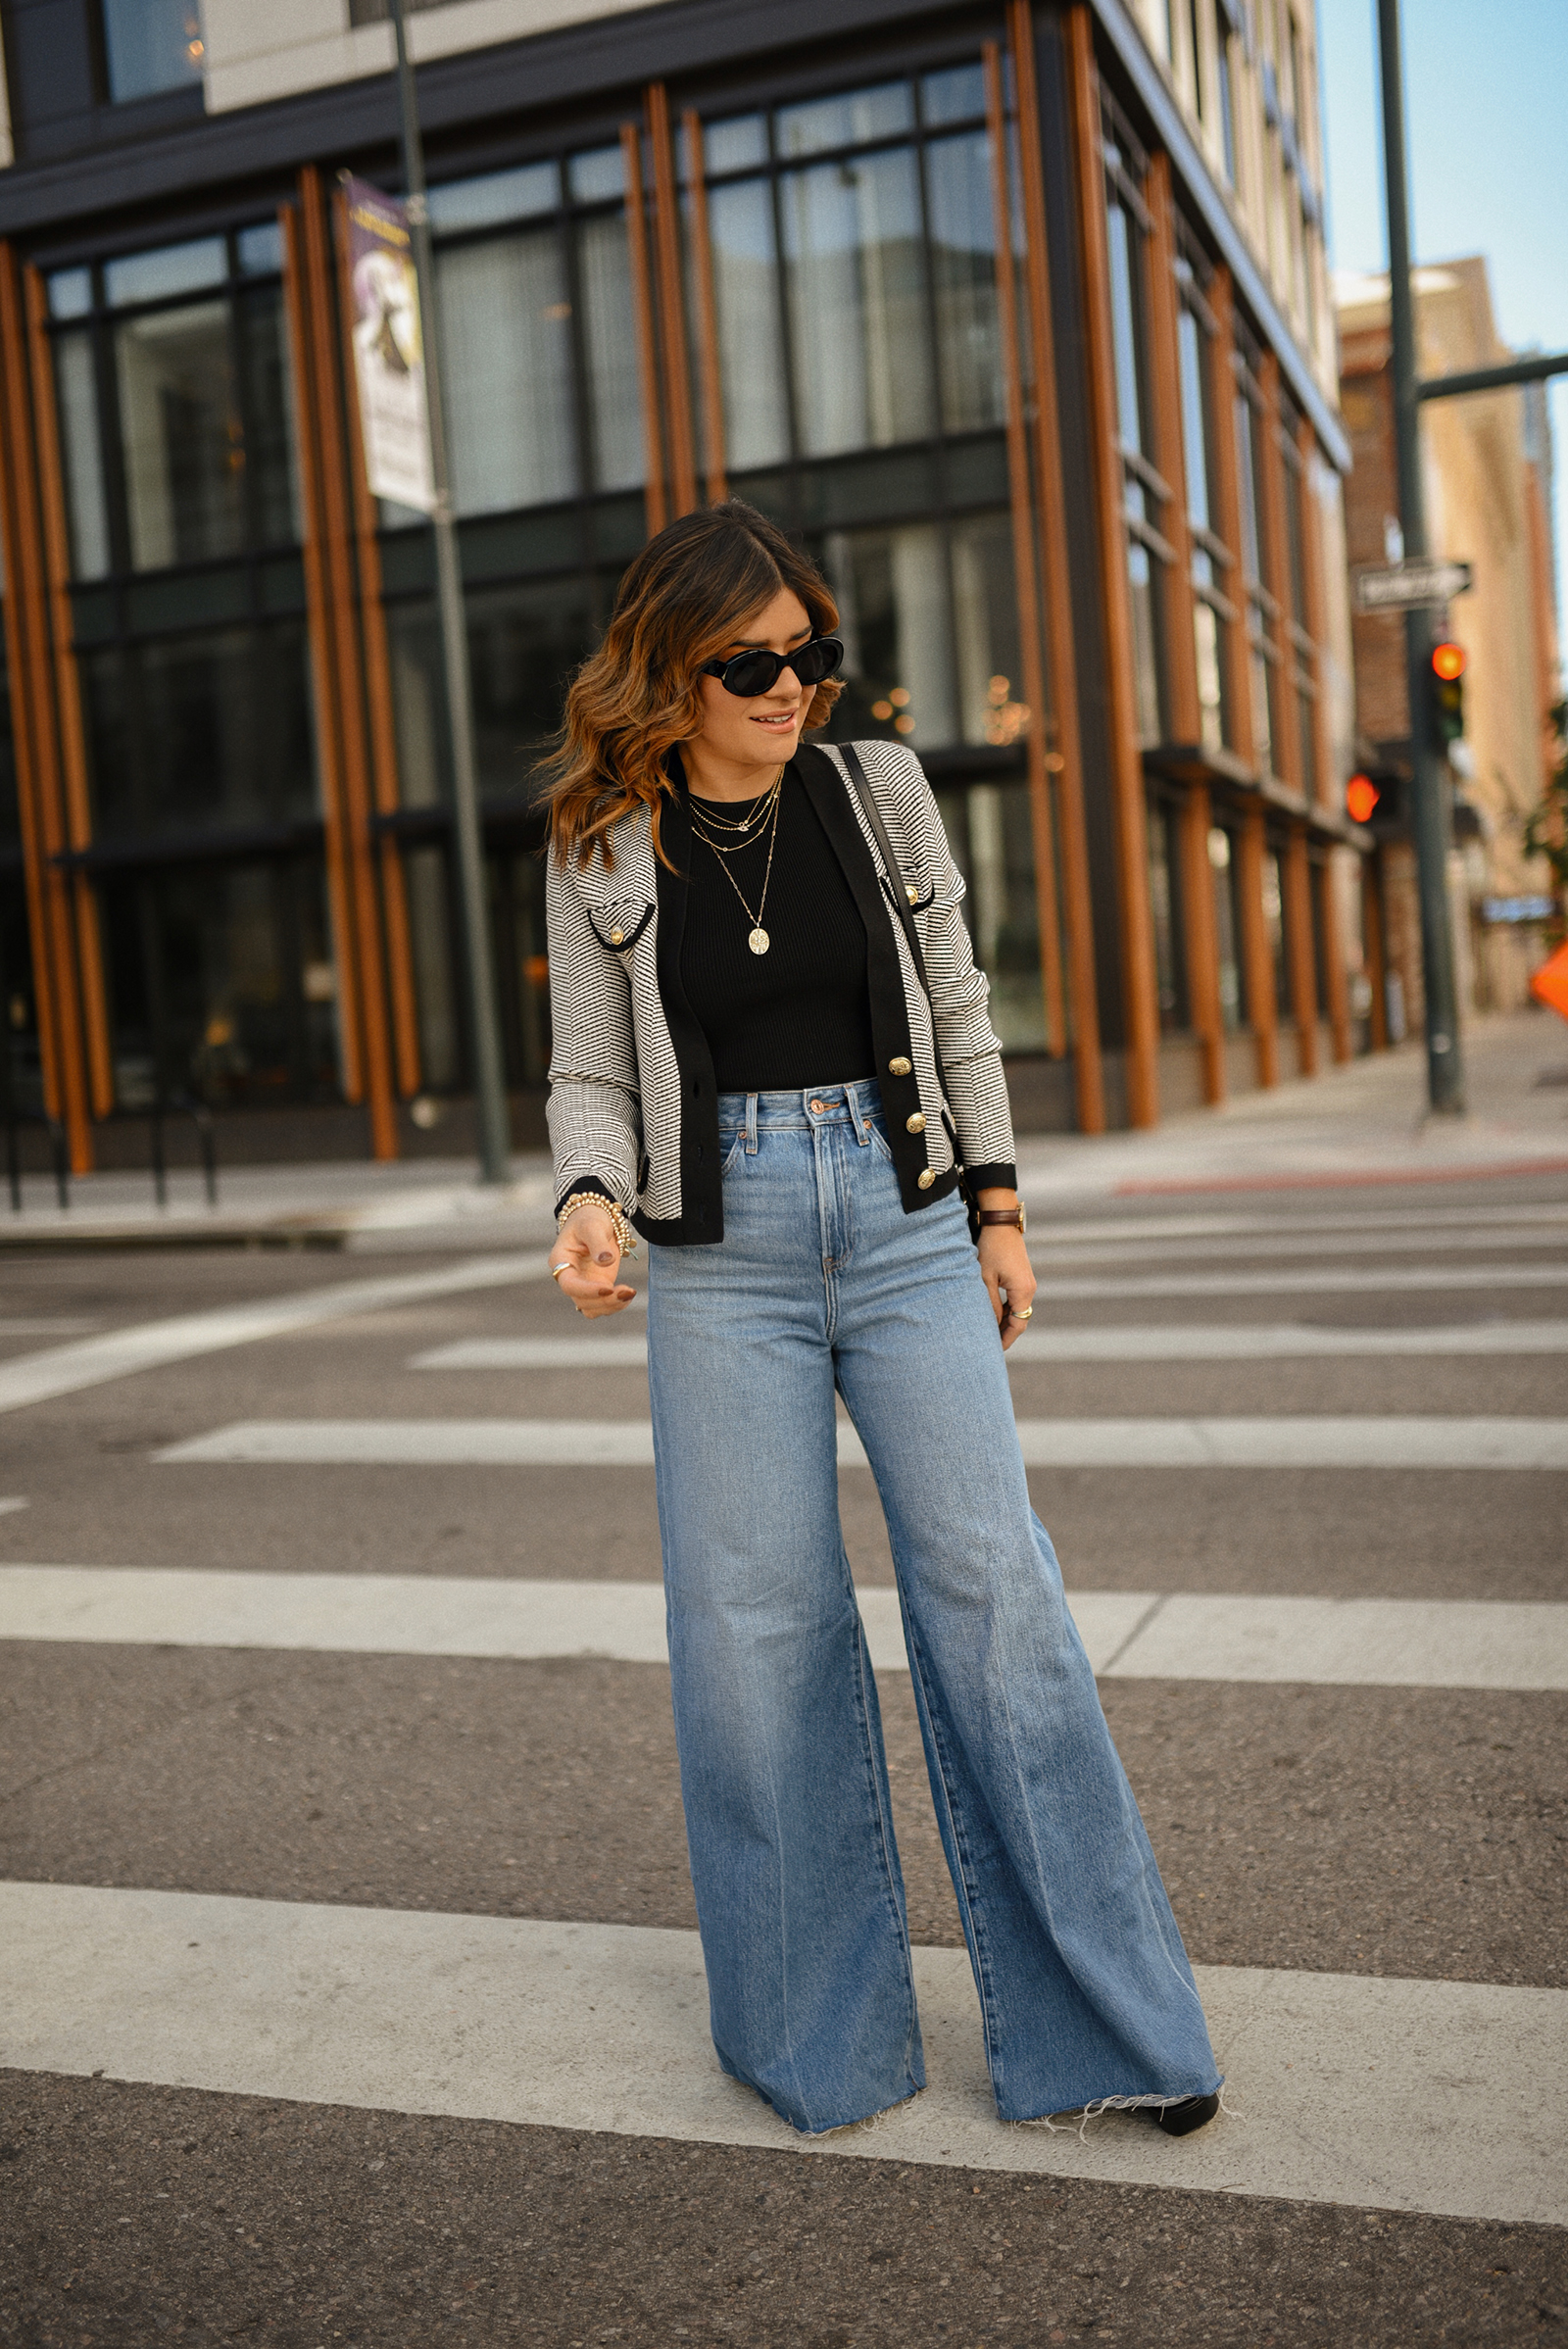 CAROLINA HELLAL FROM CHIC TALK WEARING WIDE LEG JEANS VIA EXPRESS, CHANEL INSPIRED JACKET, JACQUEMUS LE GRAND BAMBINO TOP HANDLE BAG, AND CELINE TRIOMPHE SUNGLASSES.